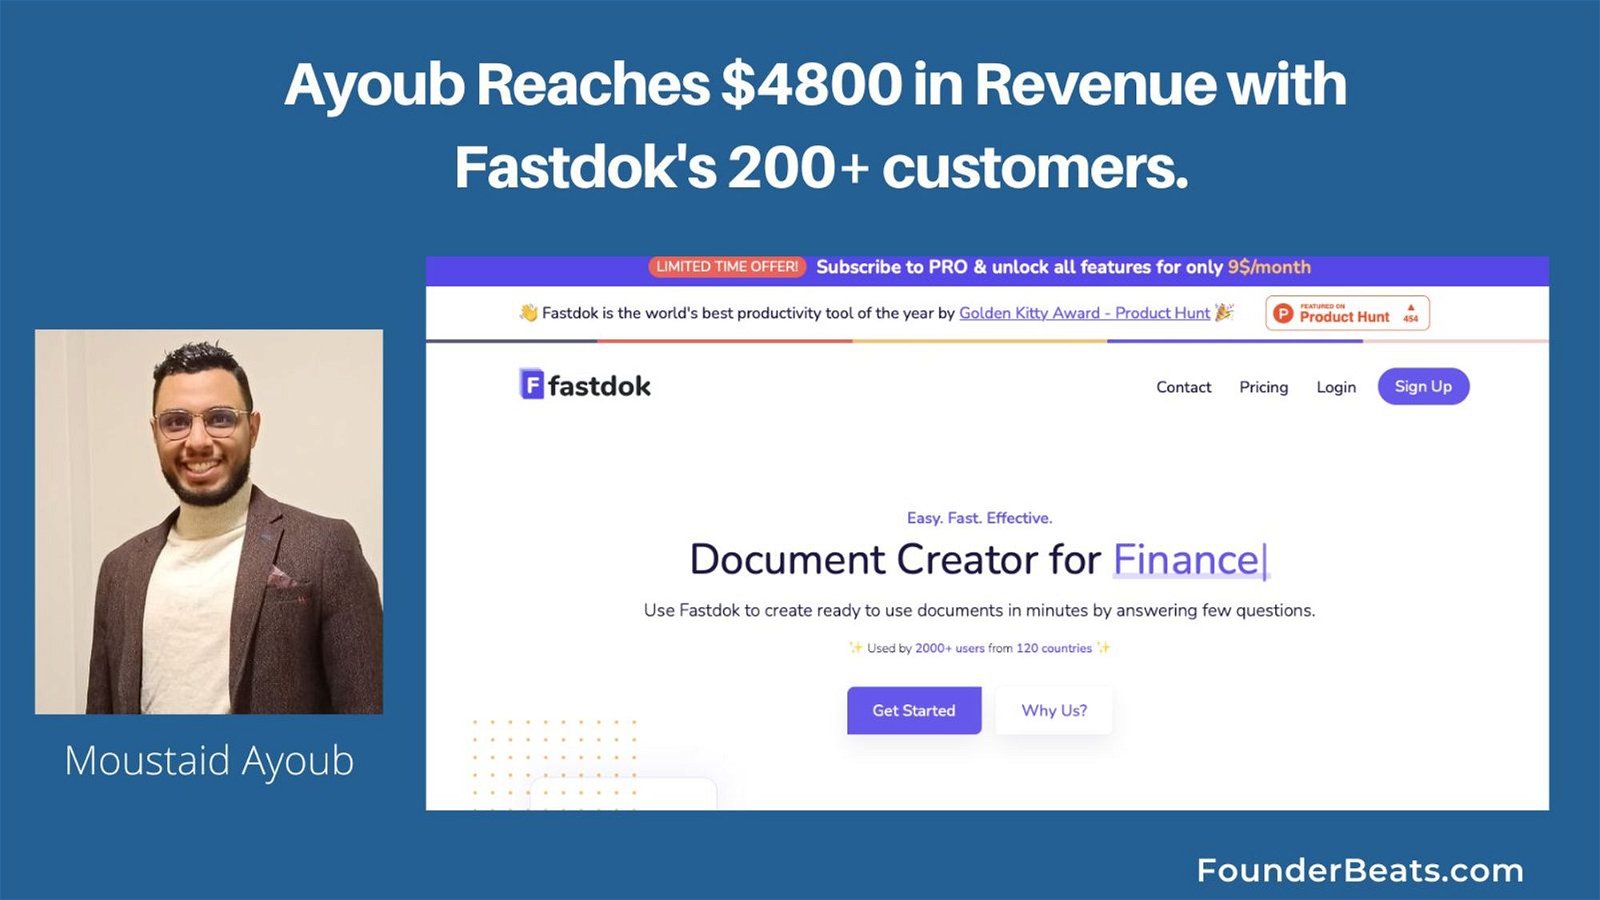 Ayoub Reaches $4800 in Revenue with Fastdok's 200+ customers